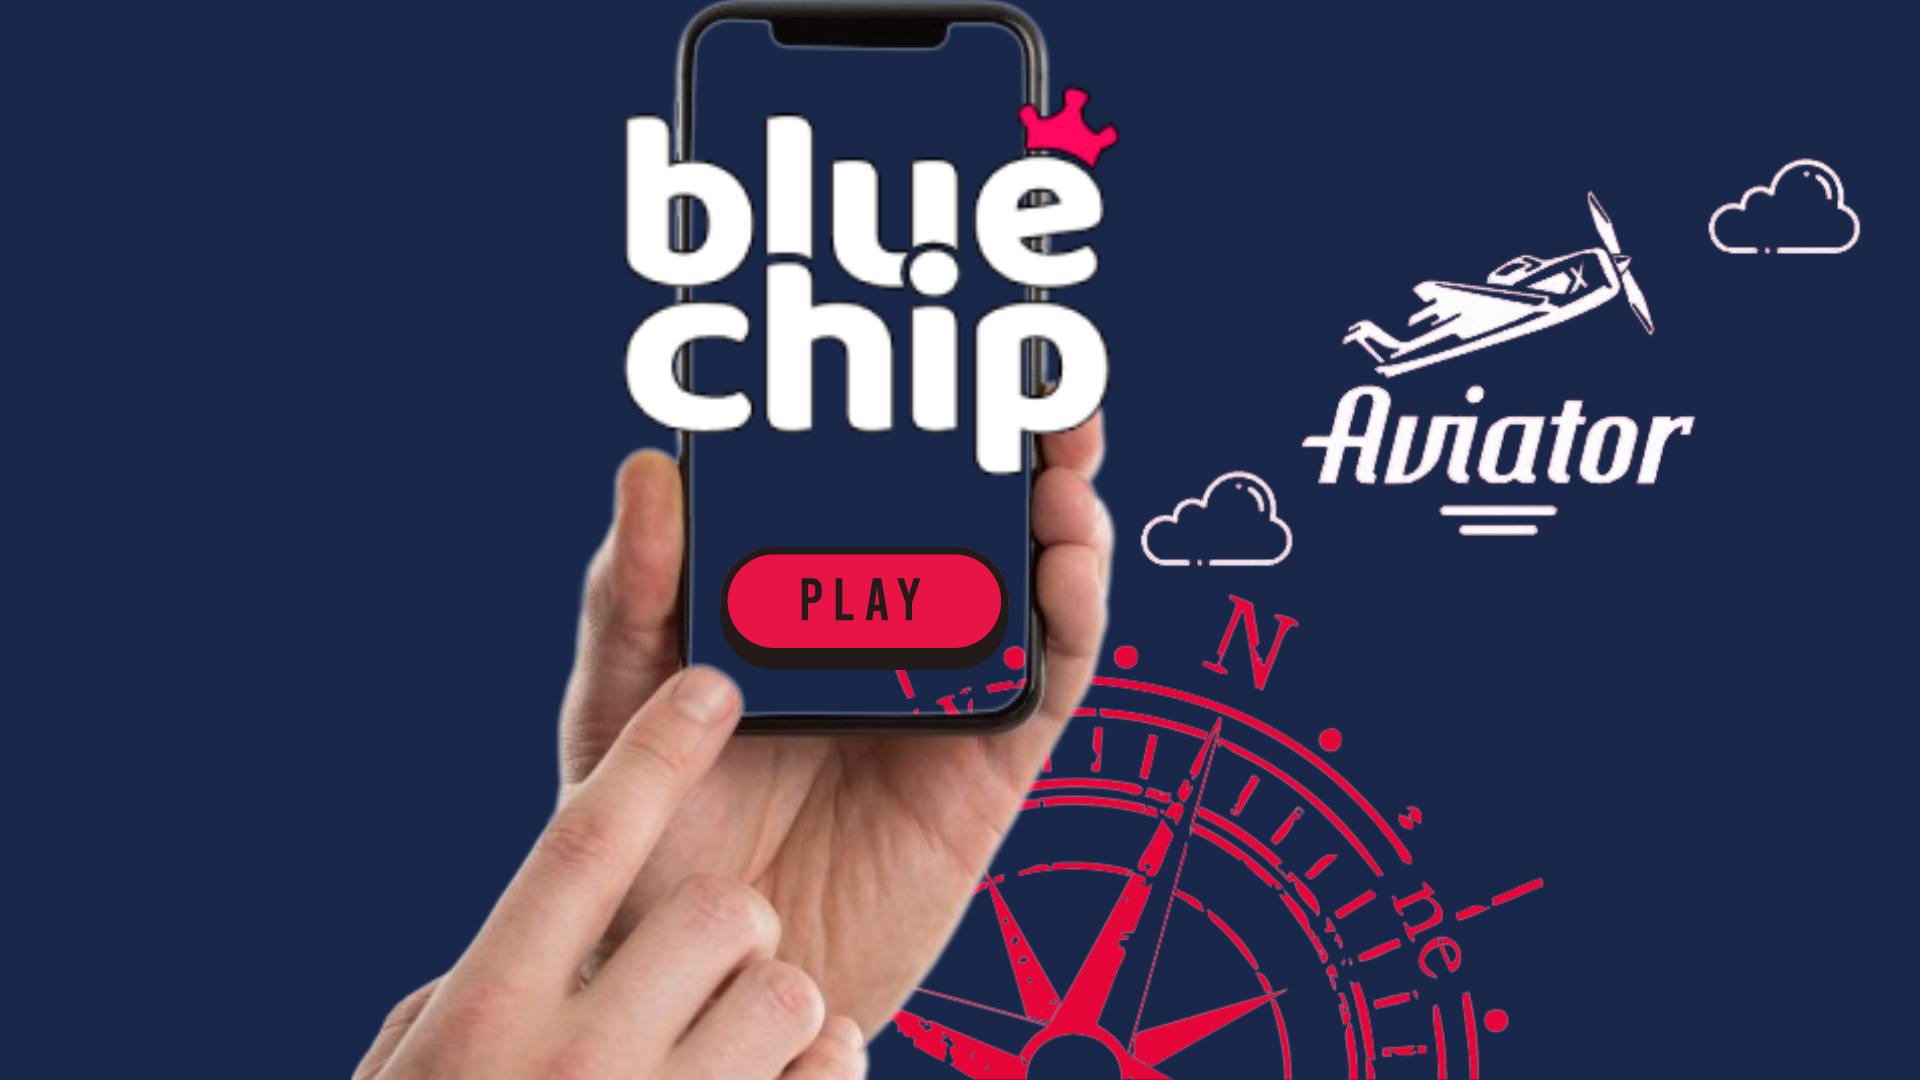 A hand holding a smart phone with the word blue chip aviator app on it

